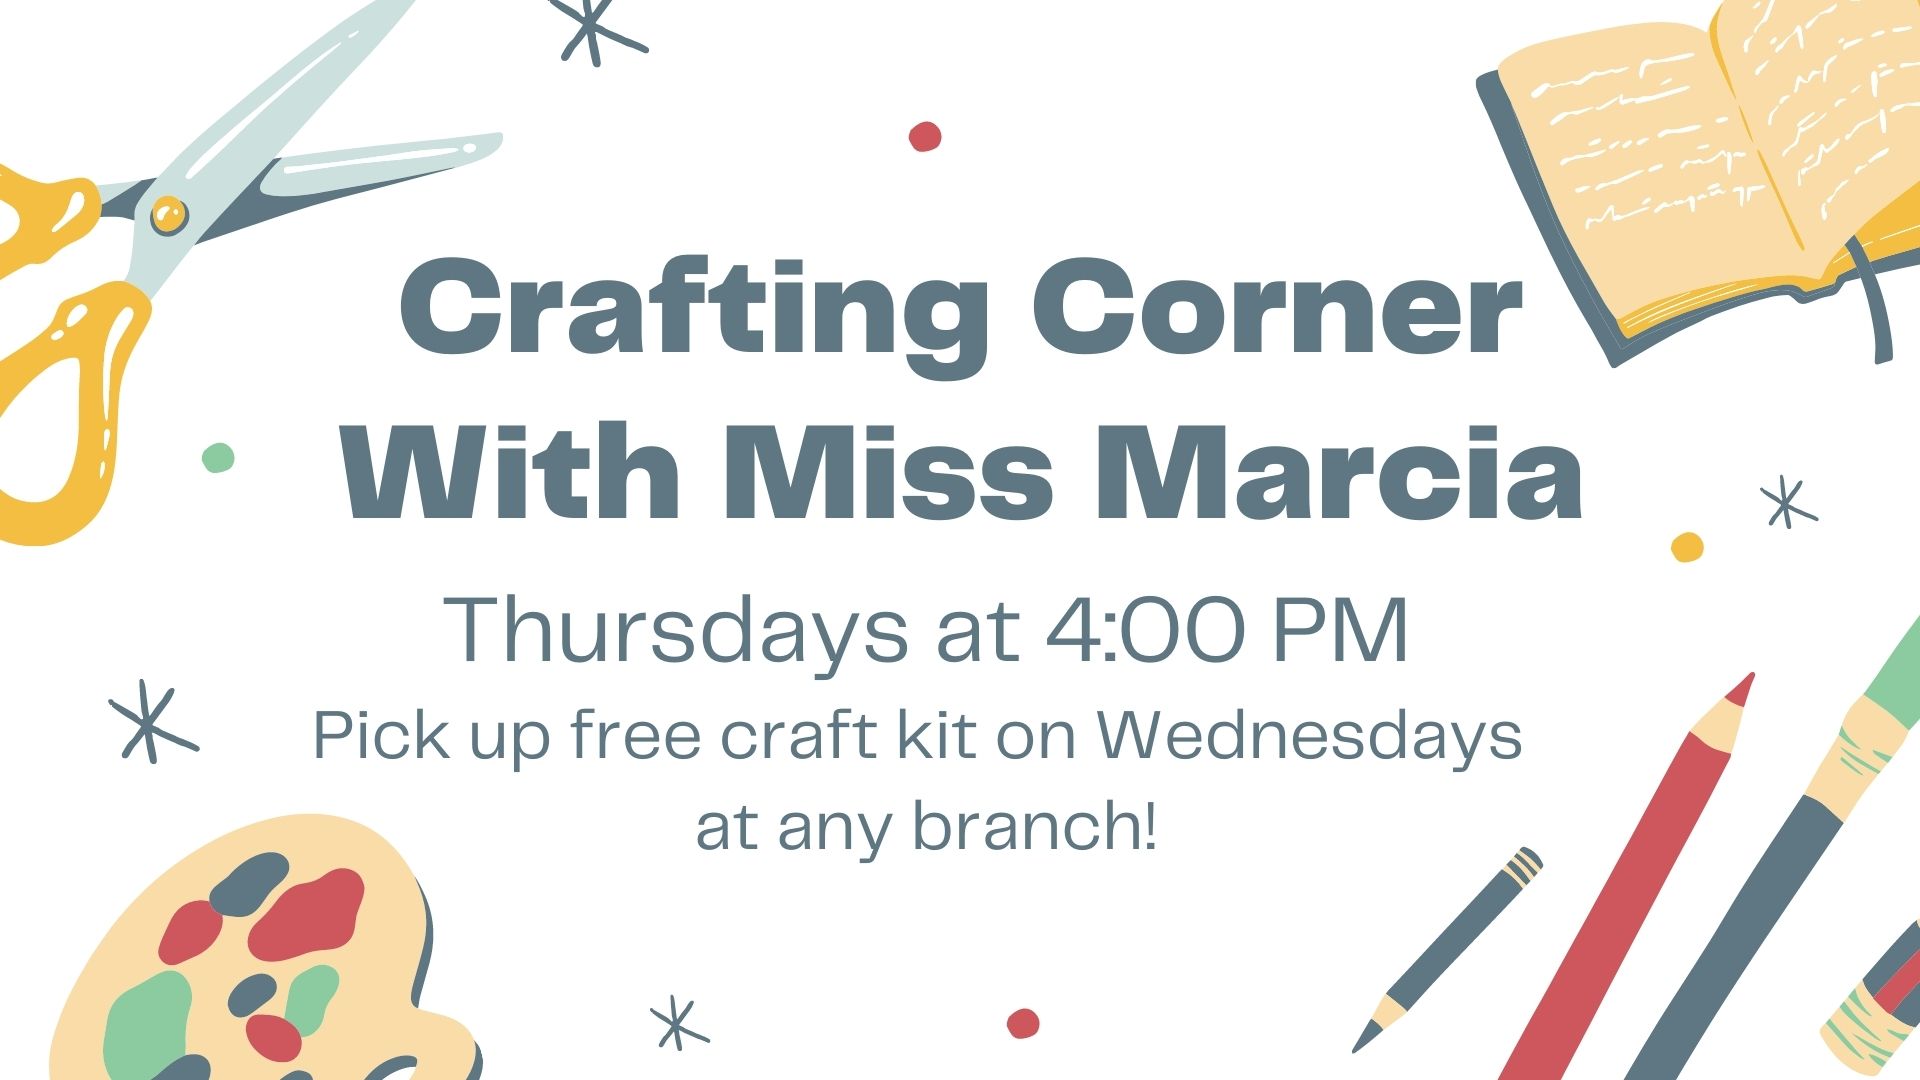 Crafting Corner with Miss Marcia